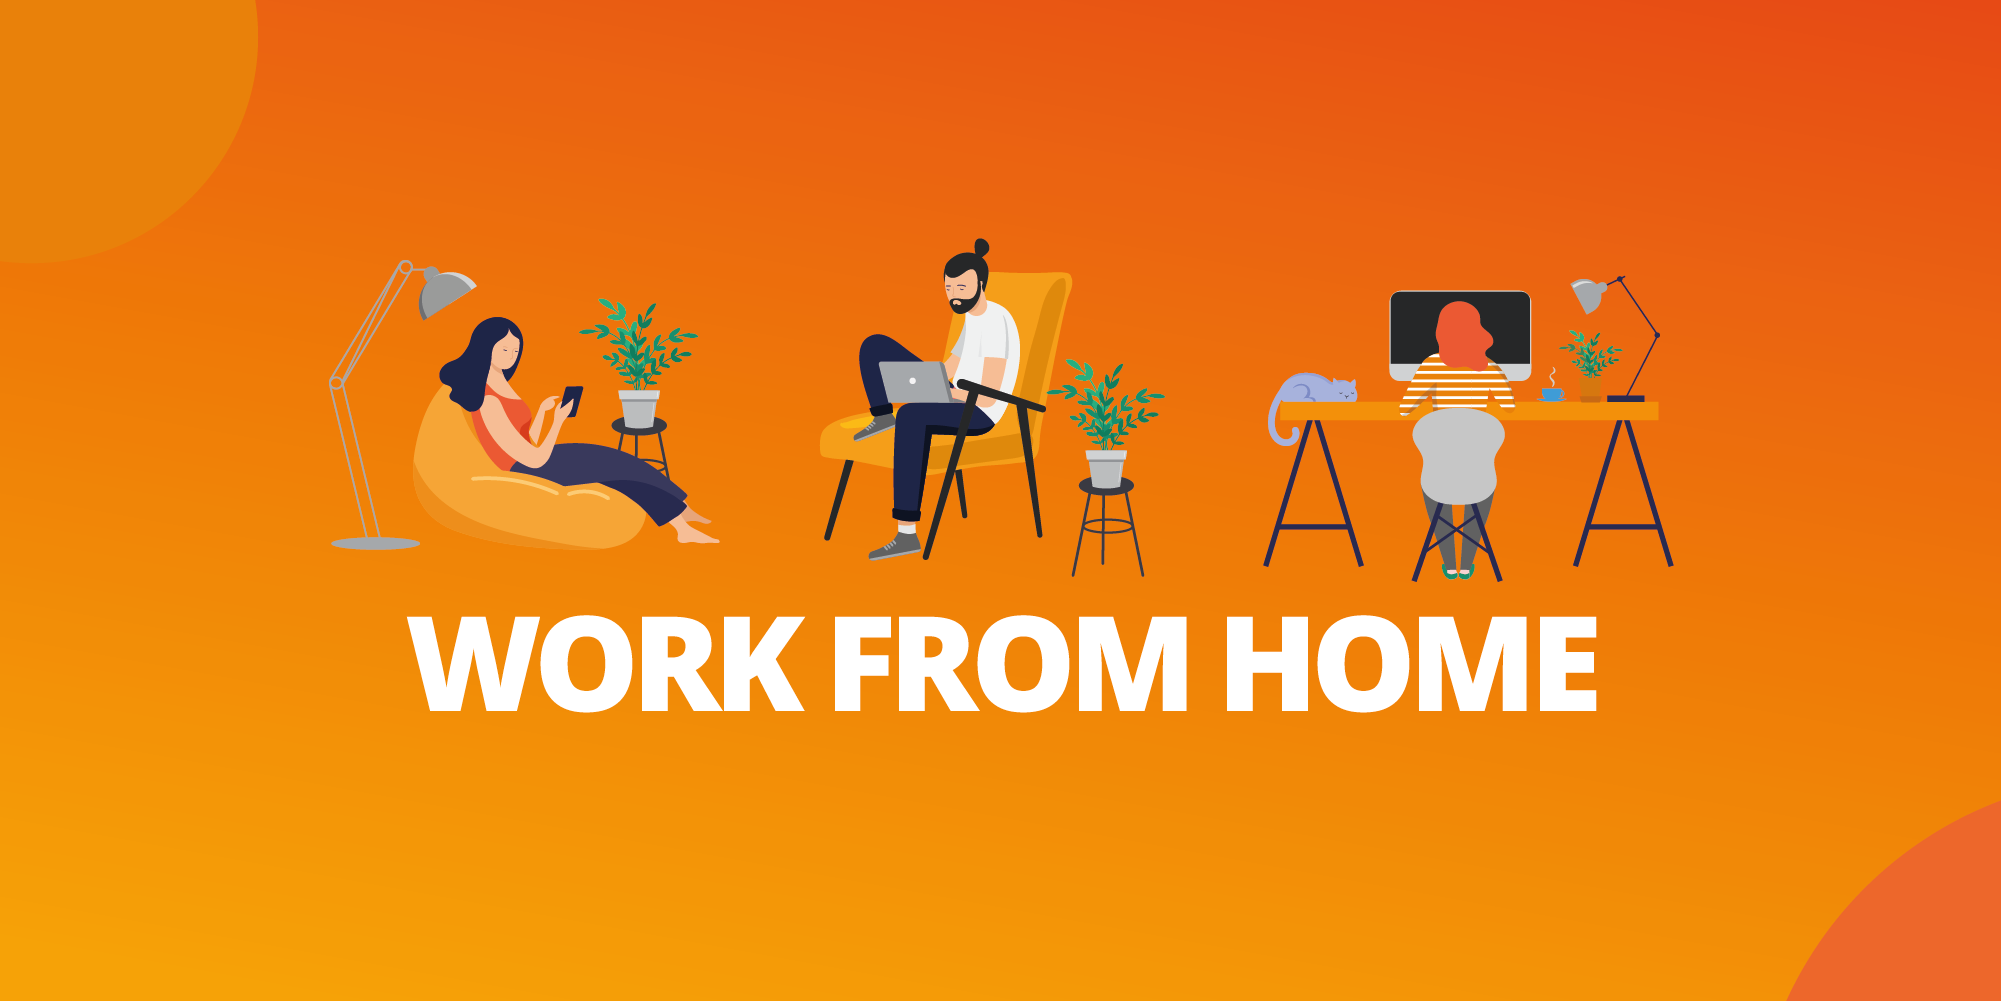 3 Easy Steps to Start Working from Home the Right Way